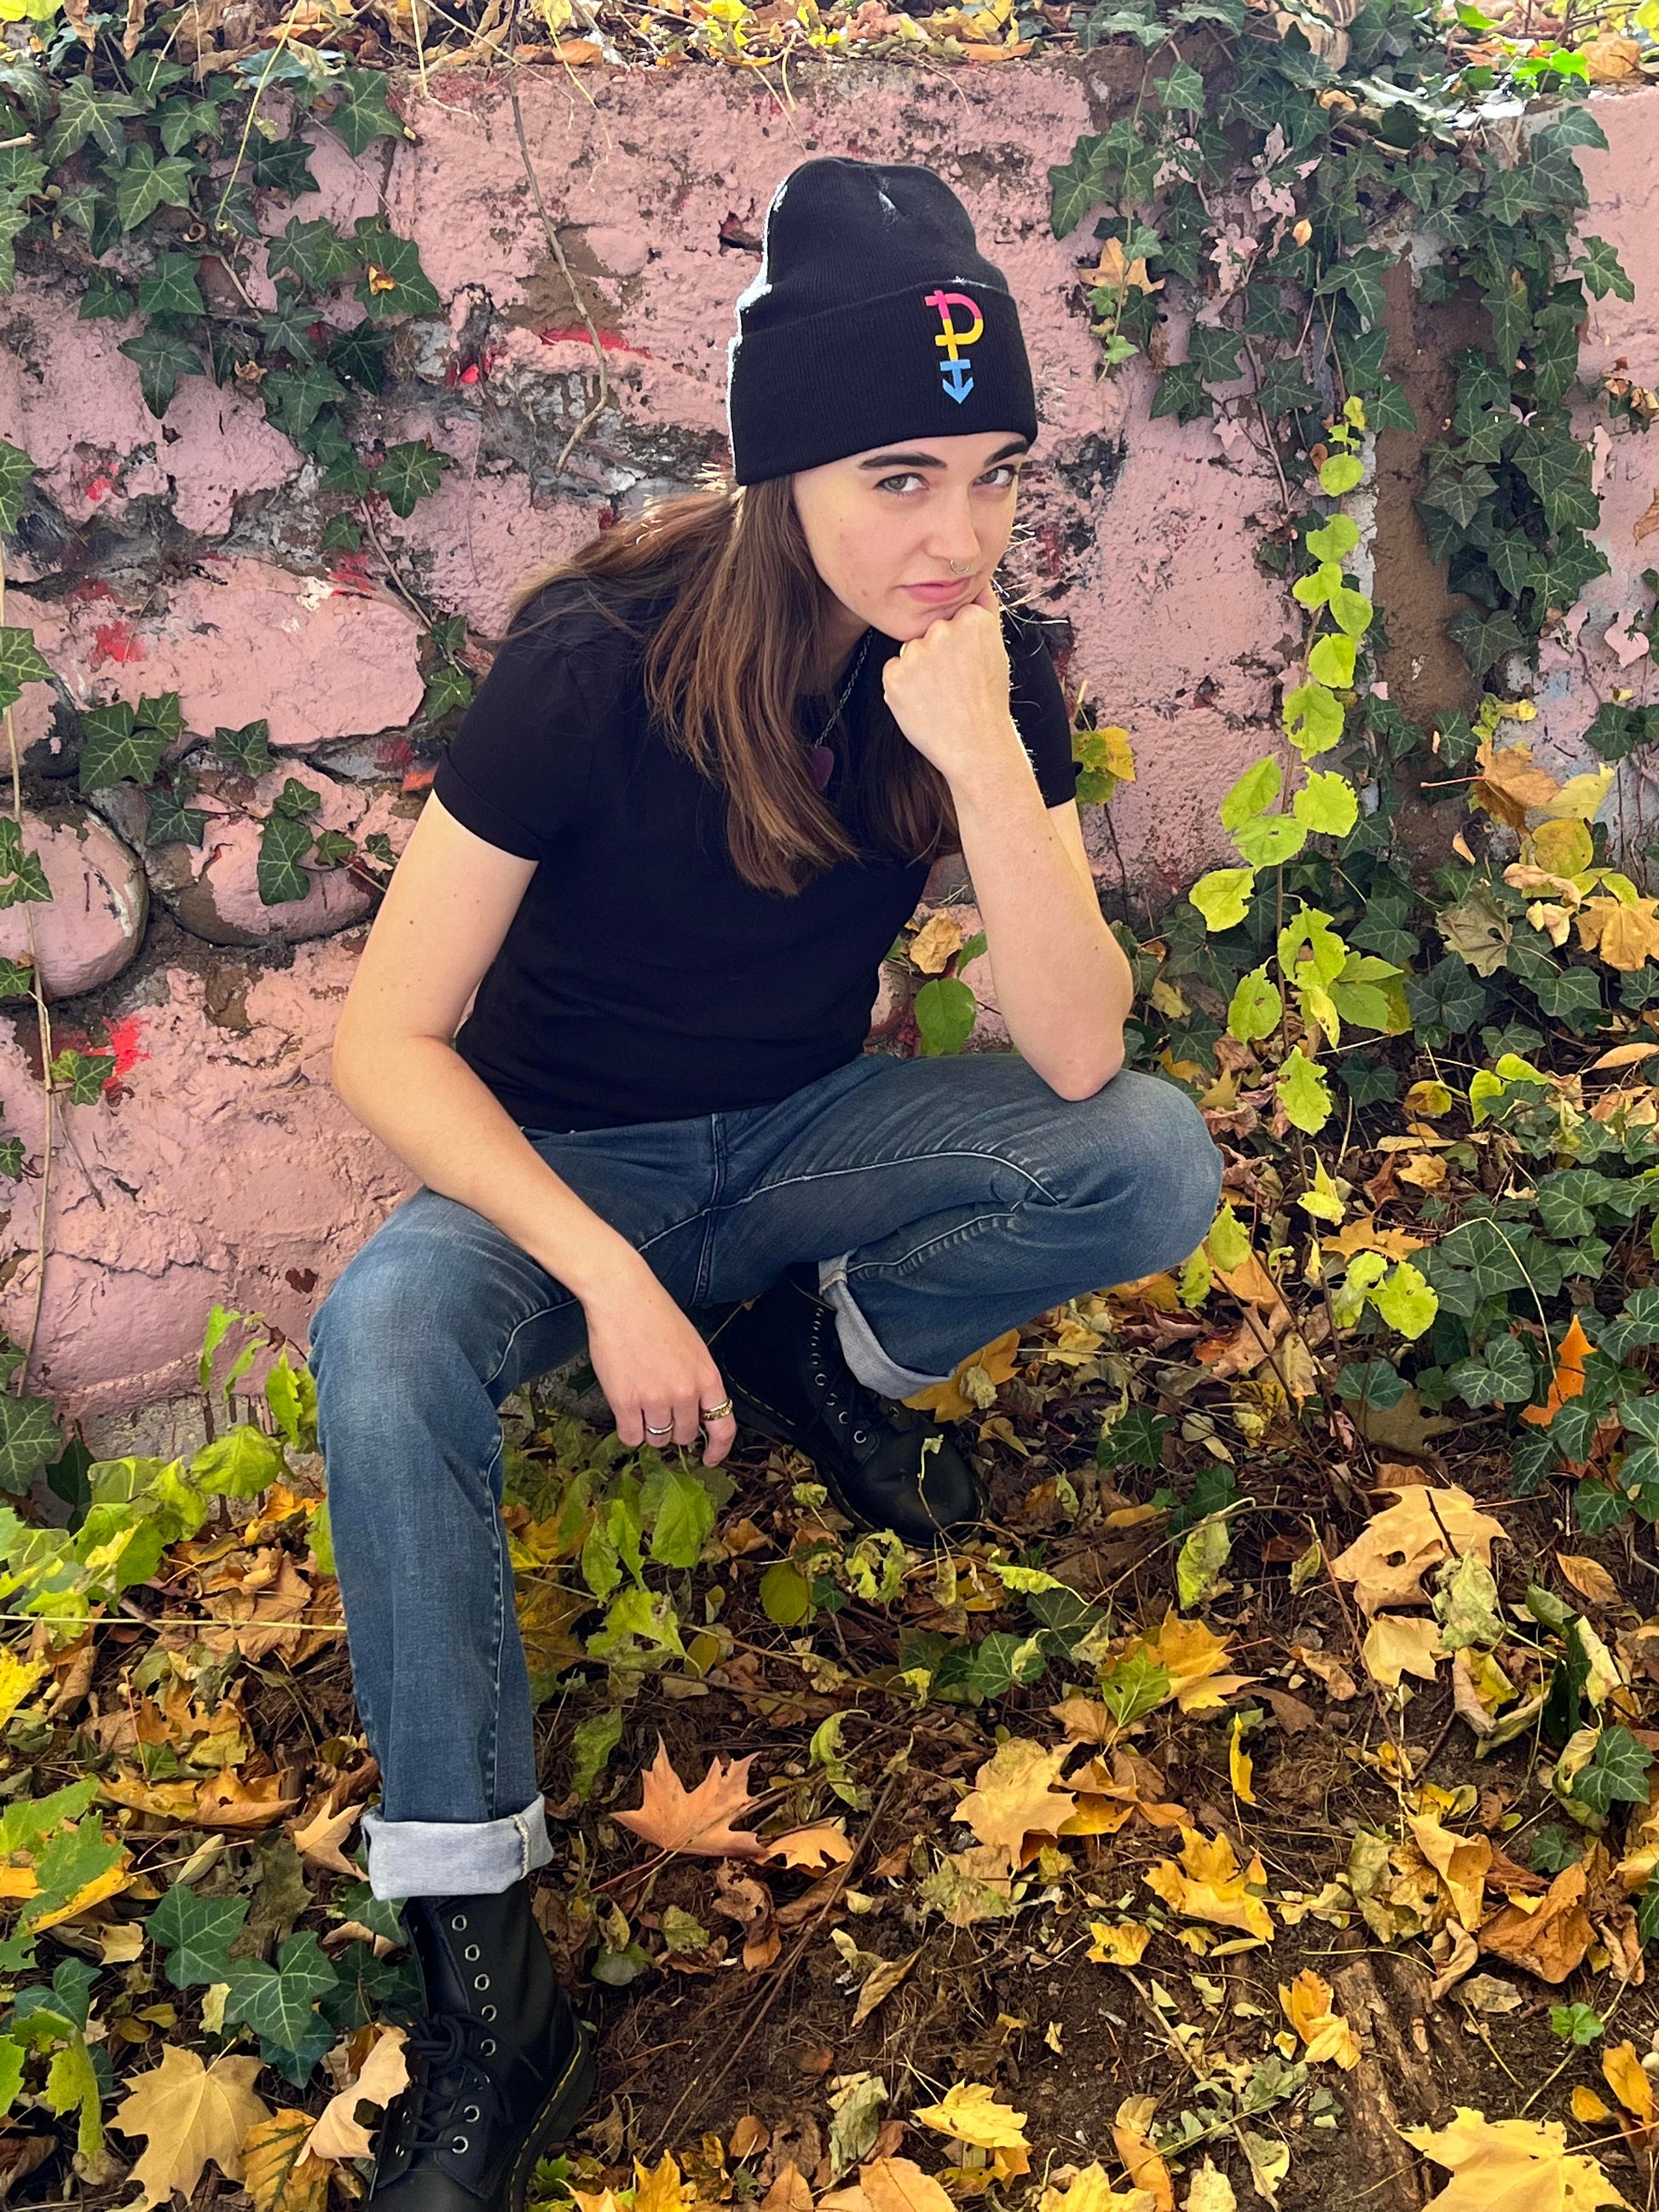 person posing like "the thinker" statue crouching in front of ivy covered wall wearing a pansexual pride beanie